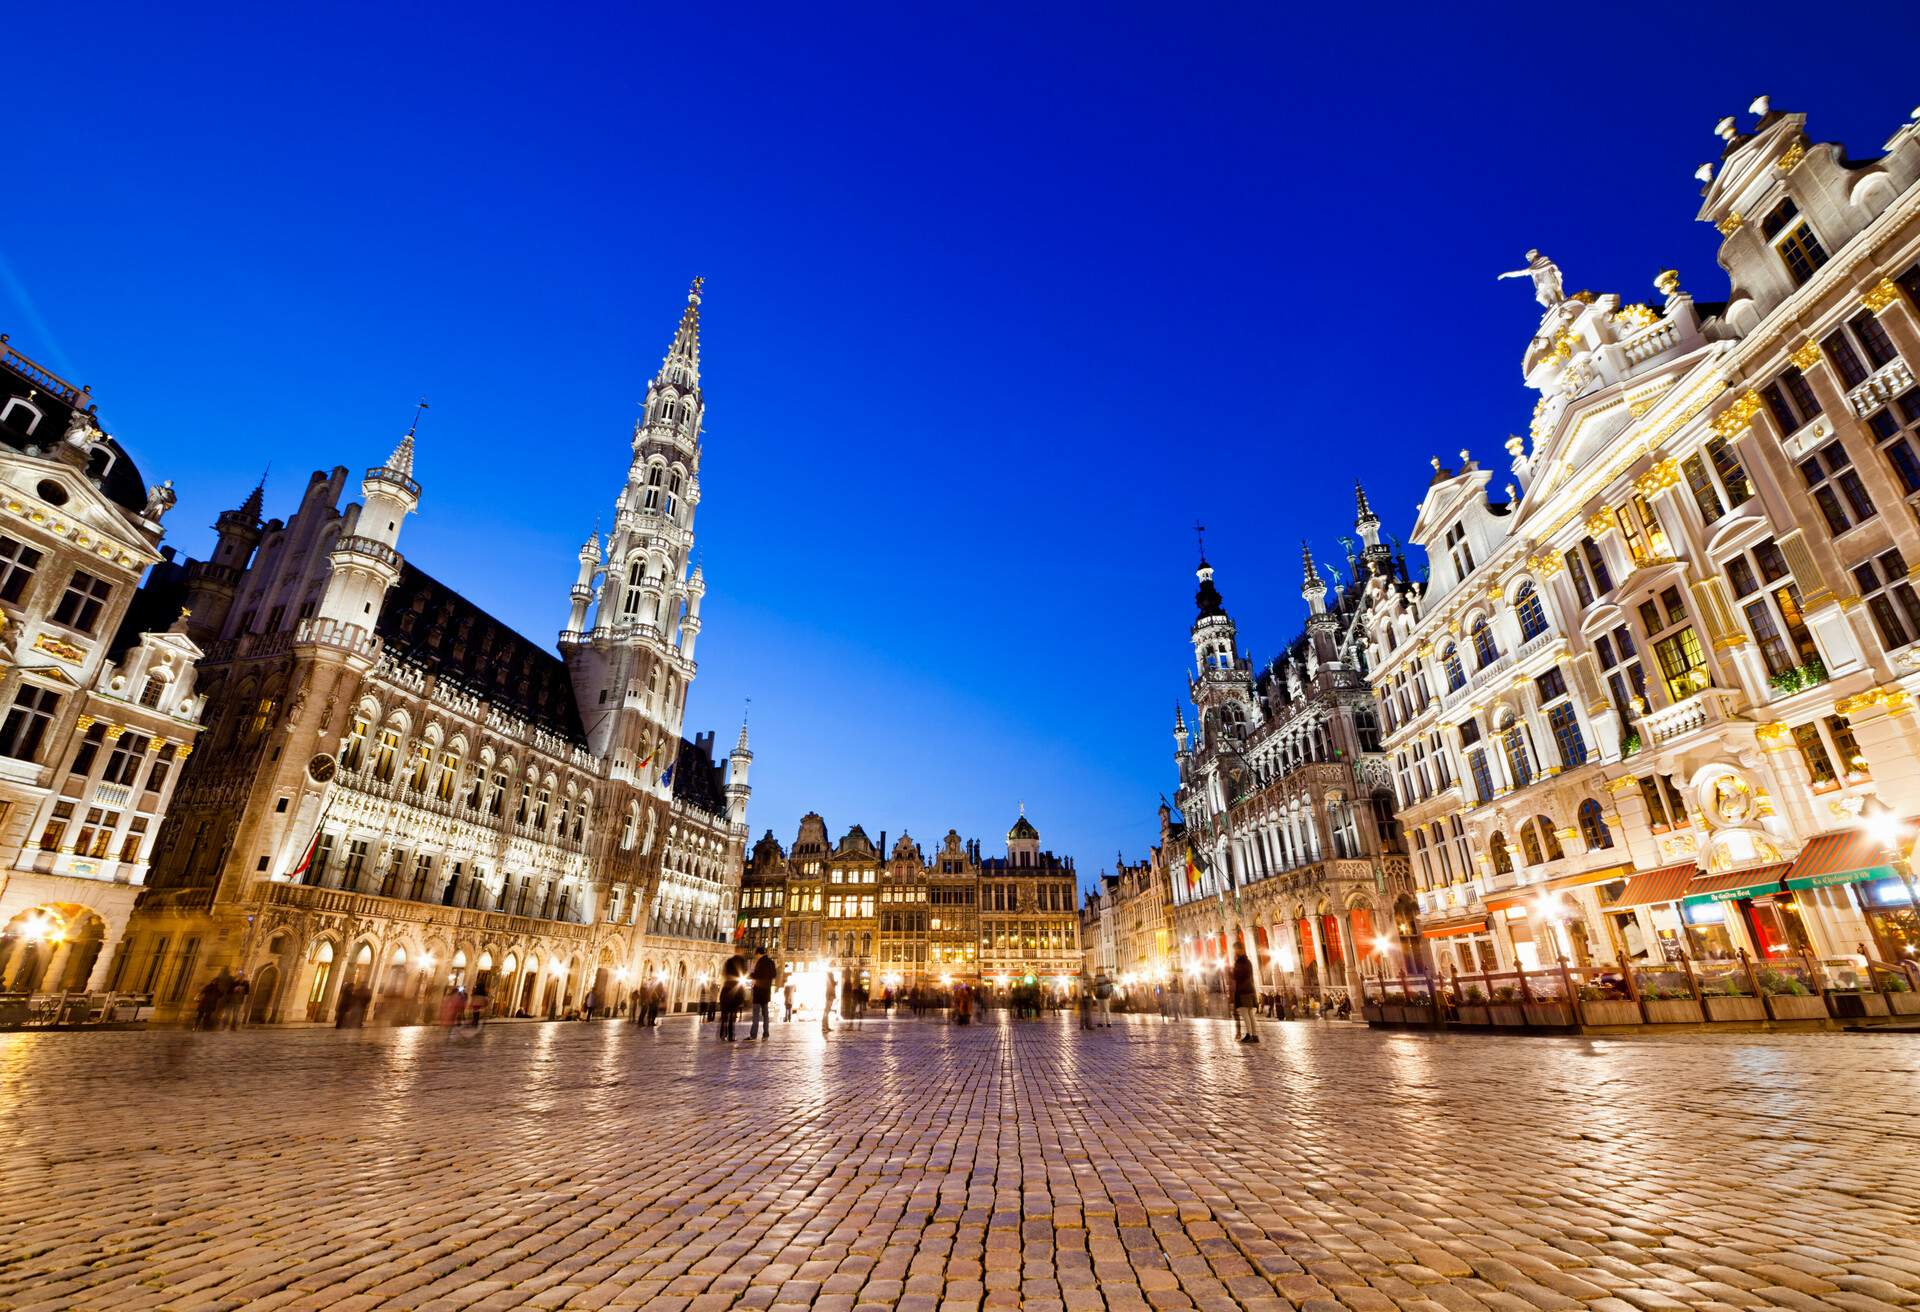 Grand Place (UNESCO World Heritage Site) at dusk - Brussels, Belgium.